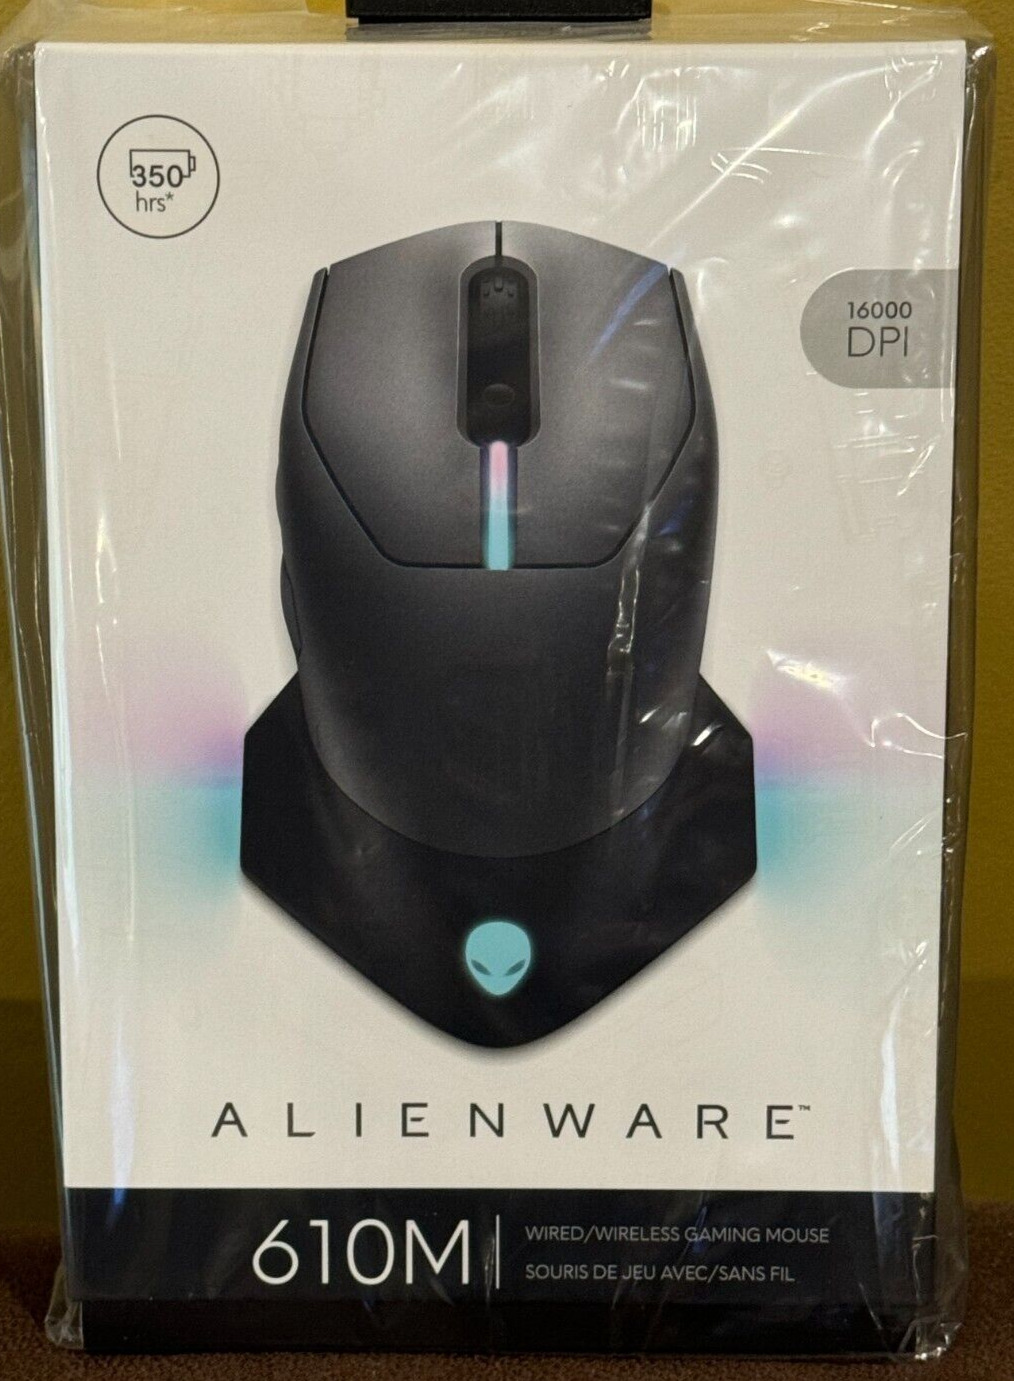 Alienware Wired/Wireless Gaming Mouse - AW610M - Dark Side Of The Moon